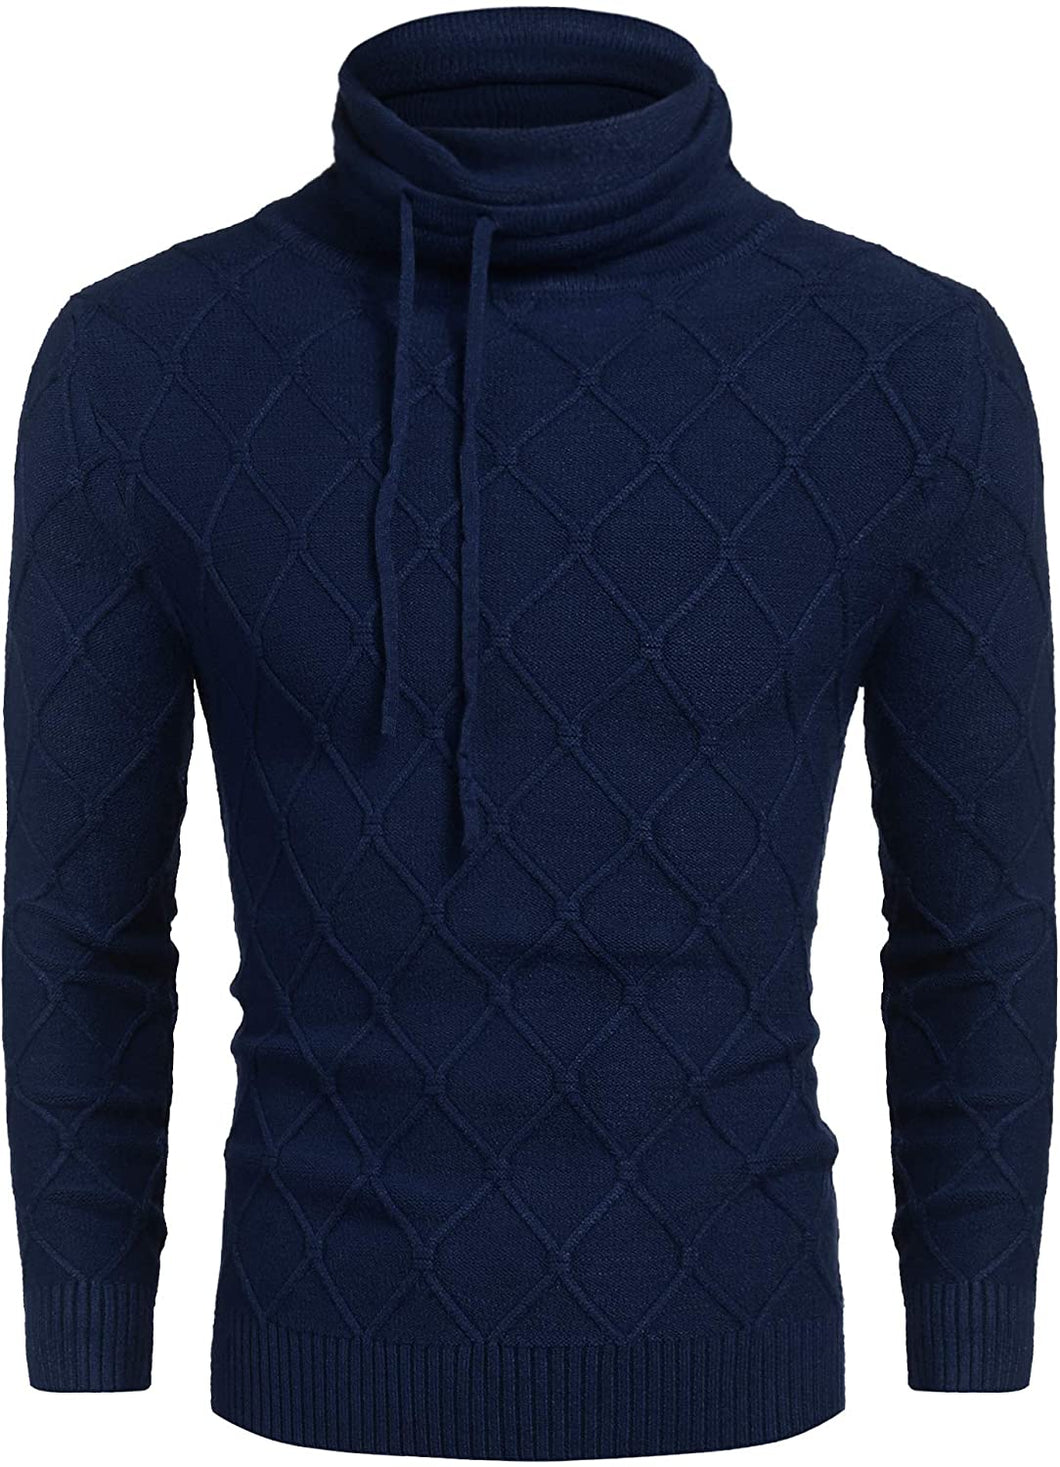 Men's Blue Knitted Diamond Pattern Sweater with Drawstrings